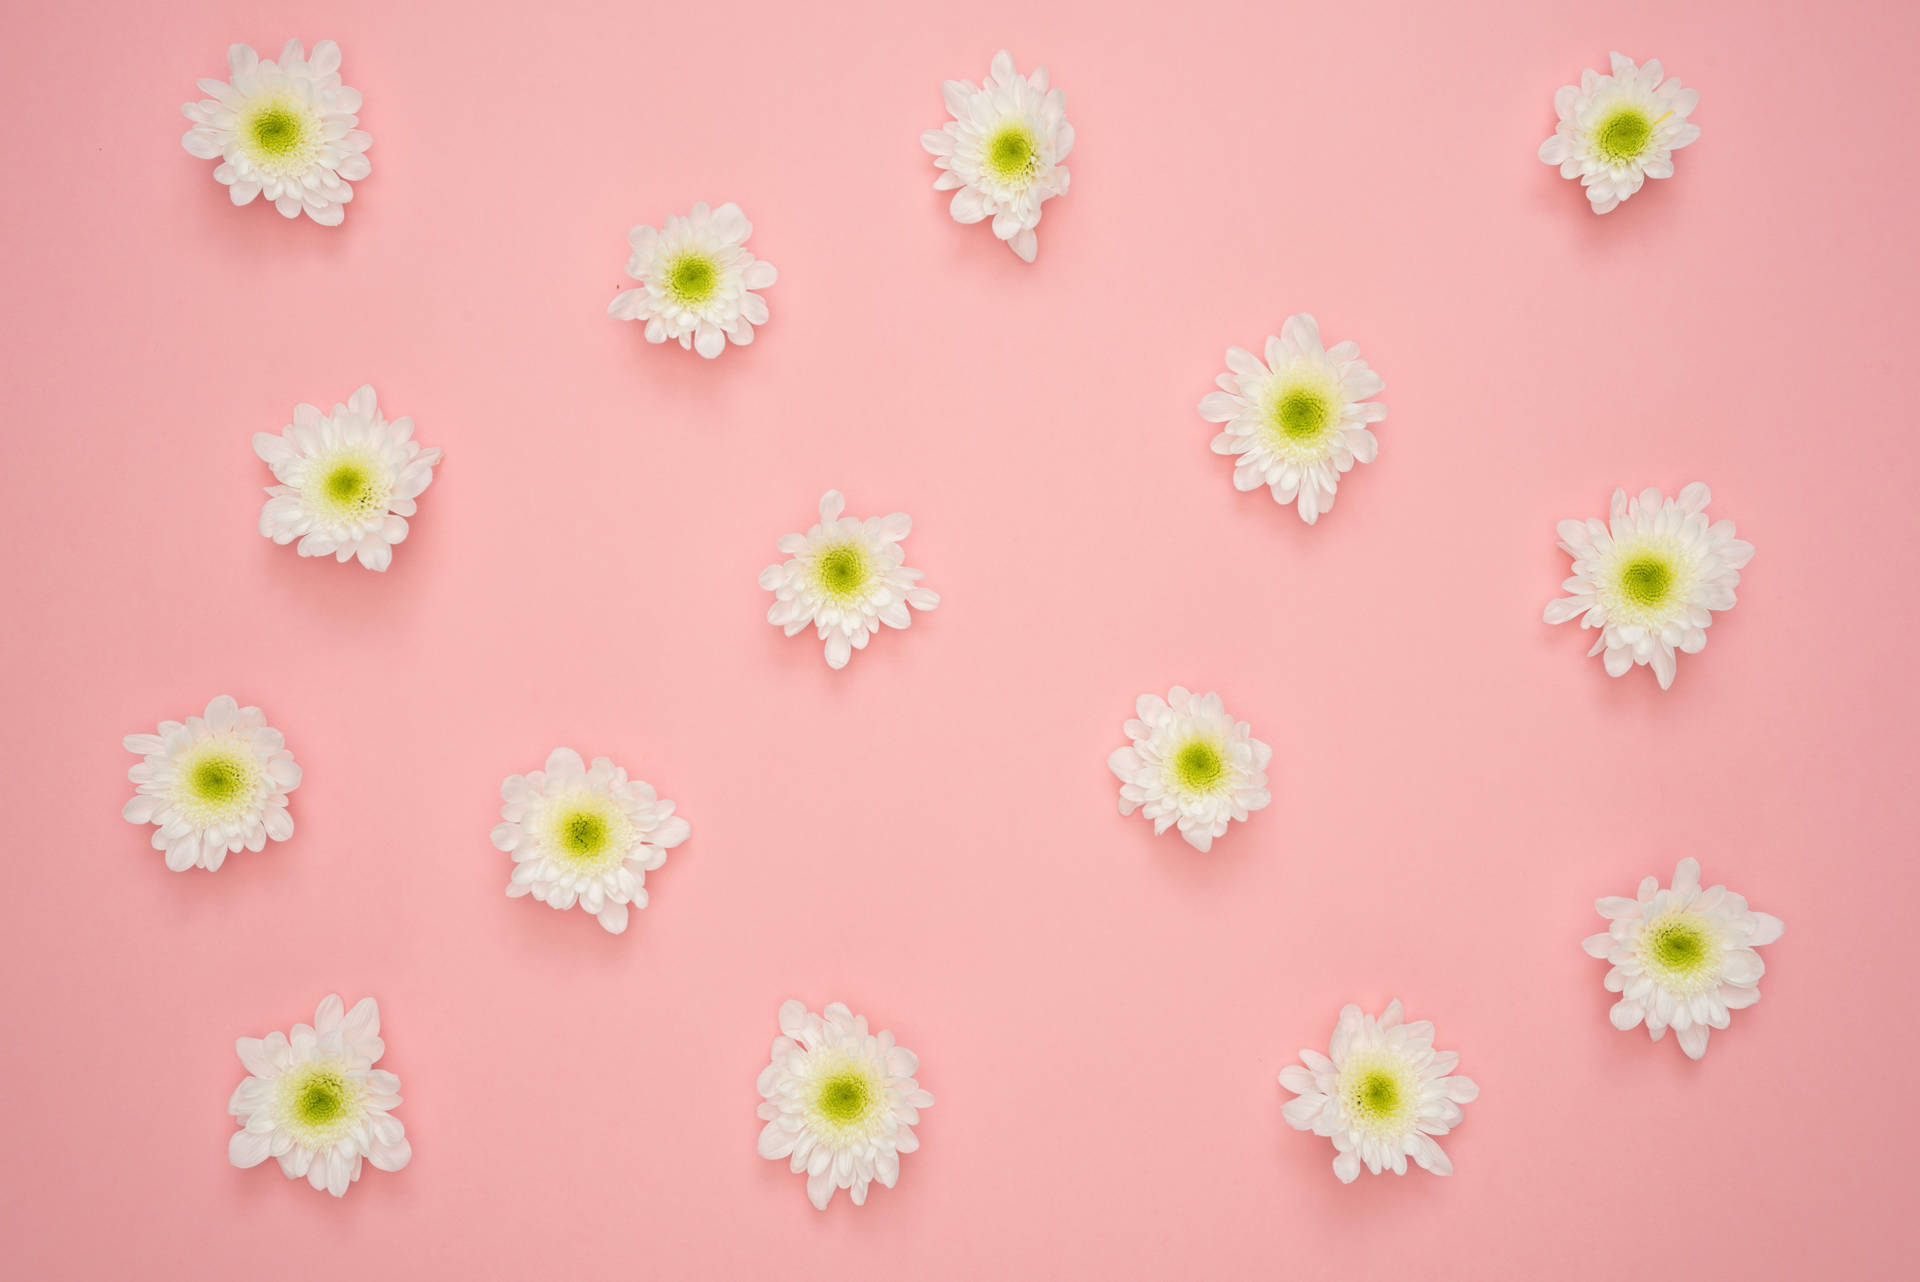 Daisy White Flowers On Pink Wallpaper